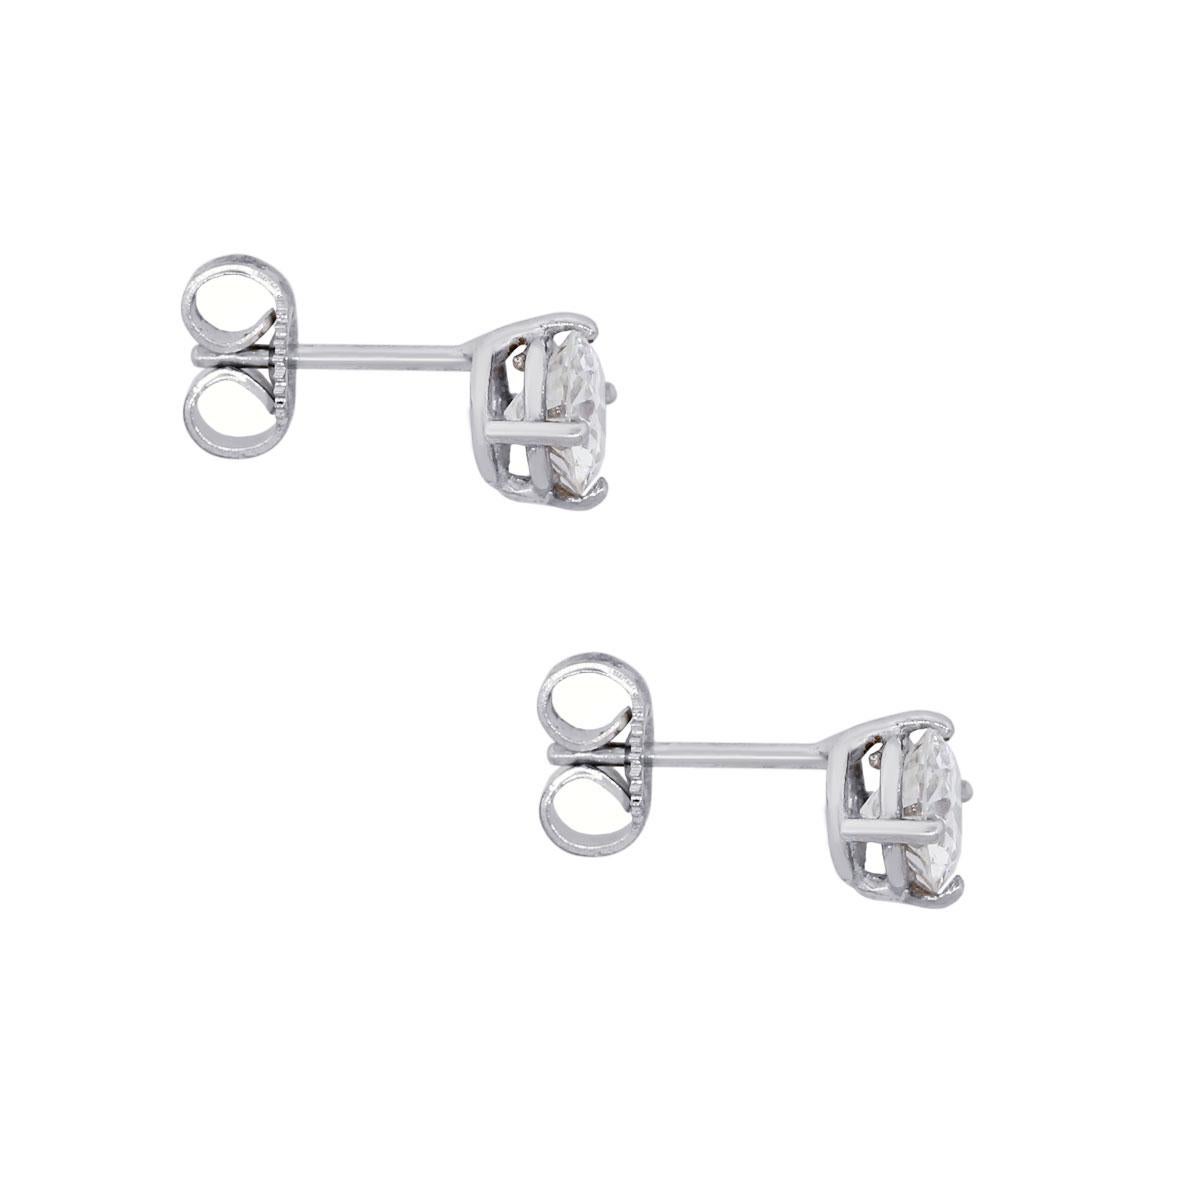 Material: 14k white gold
Diamond Details: Approximately 1.10ctw of round brilliant diamonds. Diamonds are G/H in color and SI in clarity
Earring Measurements: 0.53″ x 0.20″ x 0.20″
Total Weight: 1.2g (0.7dwt)
Earring backs: Post friction
Additional